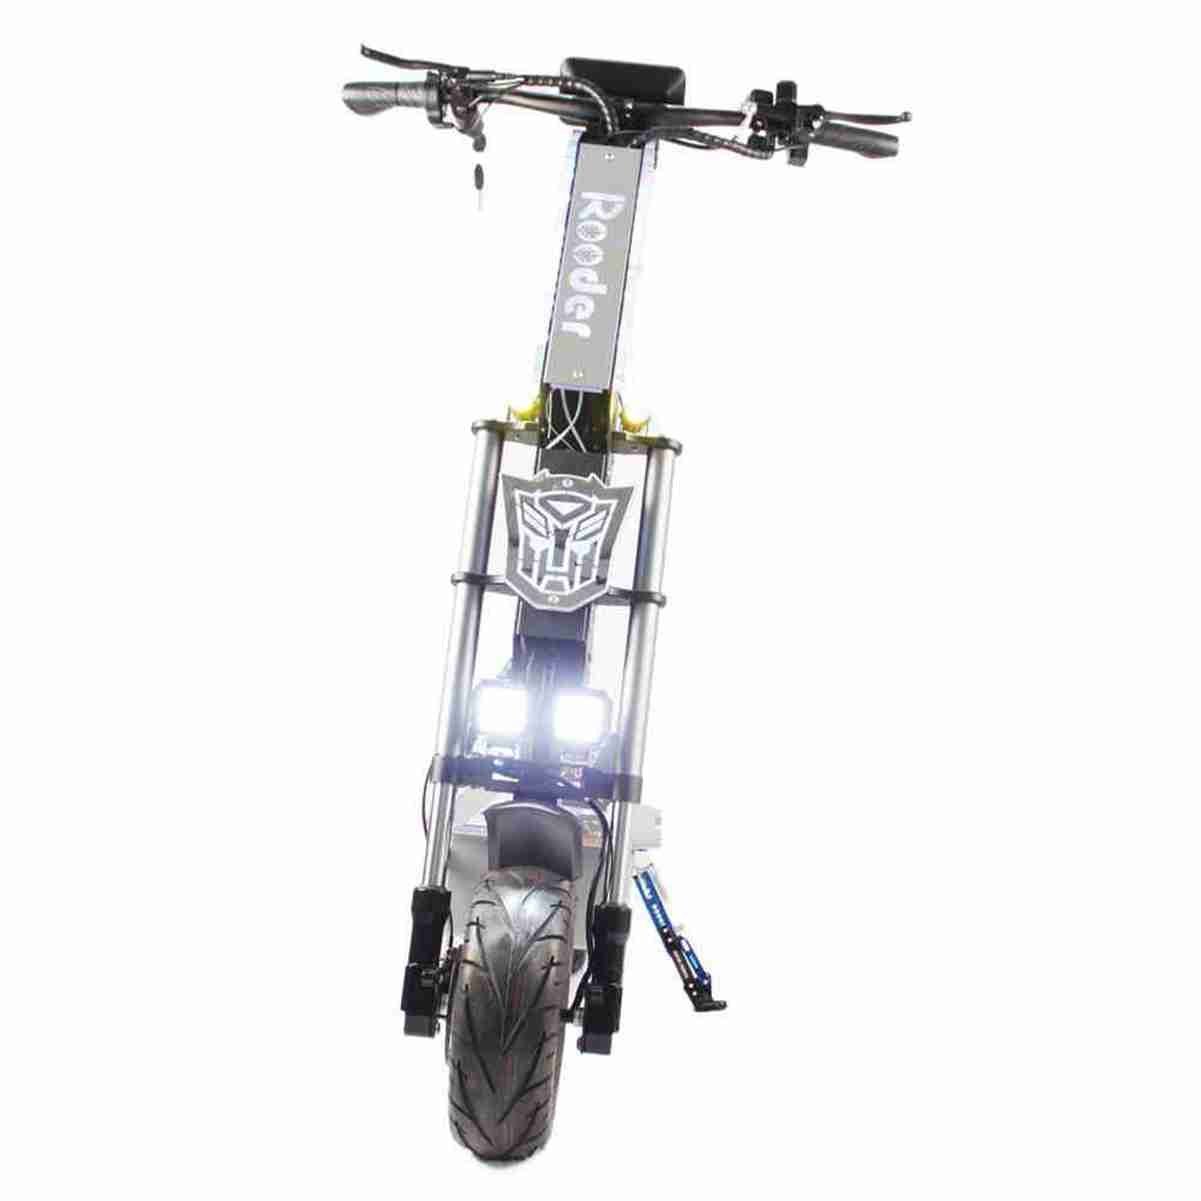 500w electric scooter